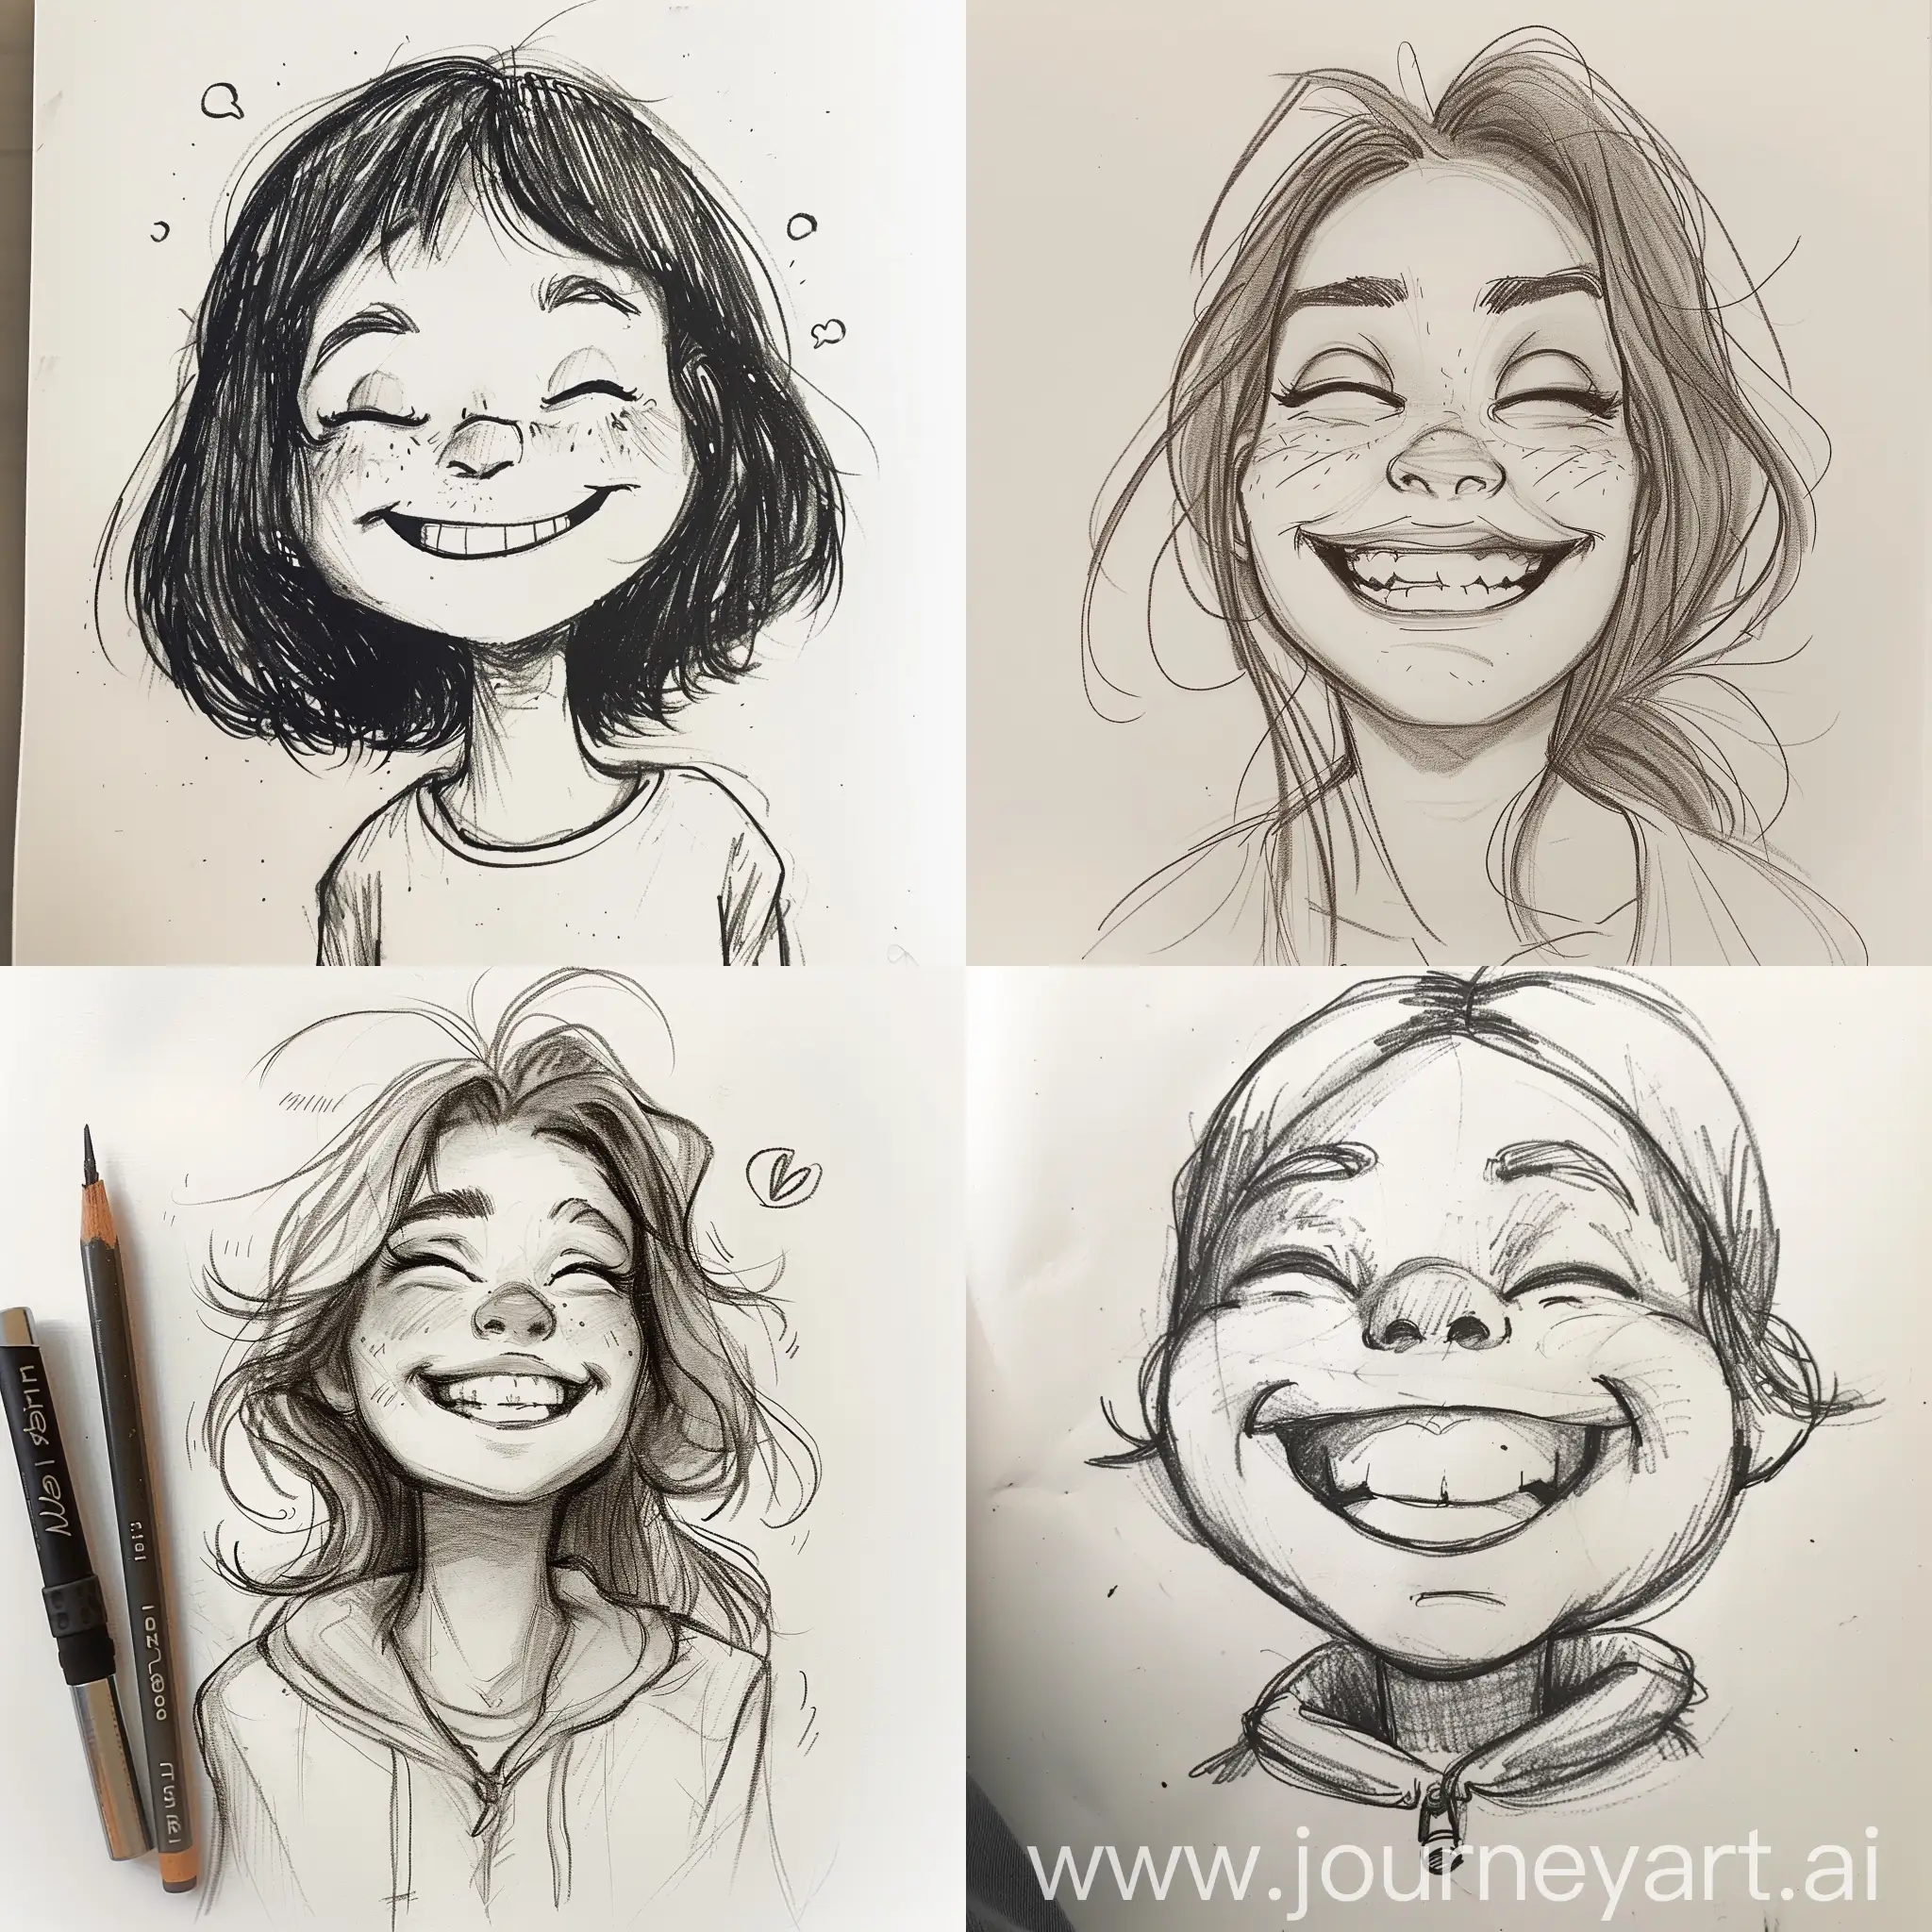 Draw me a very happy person